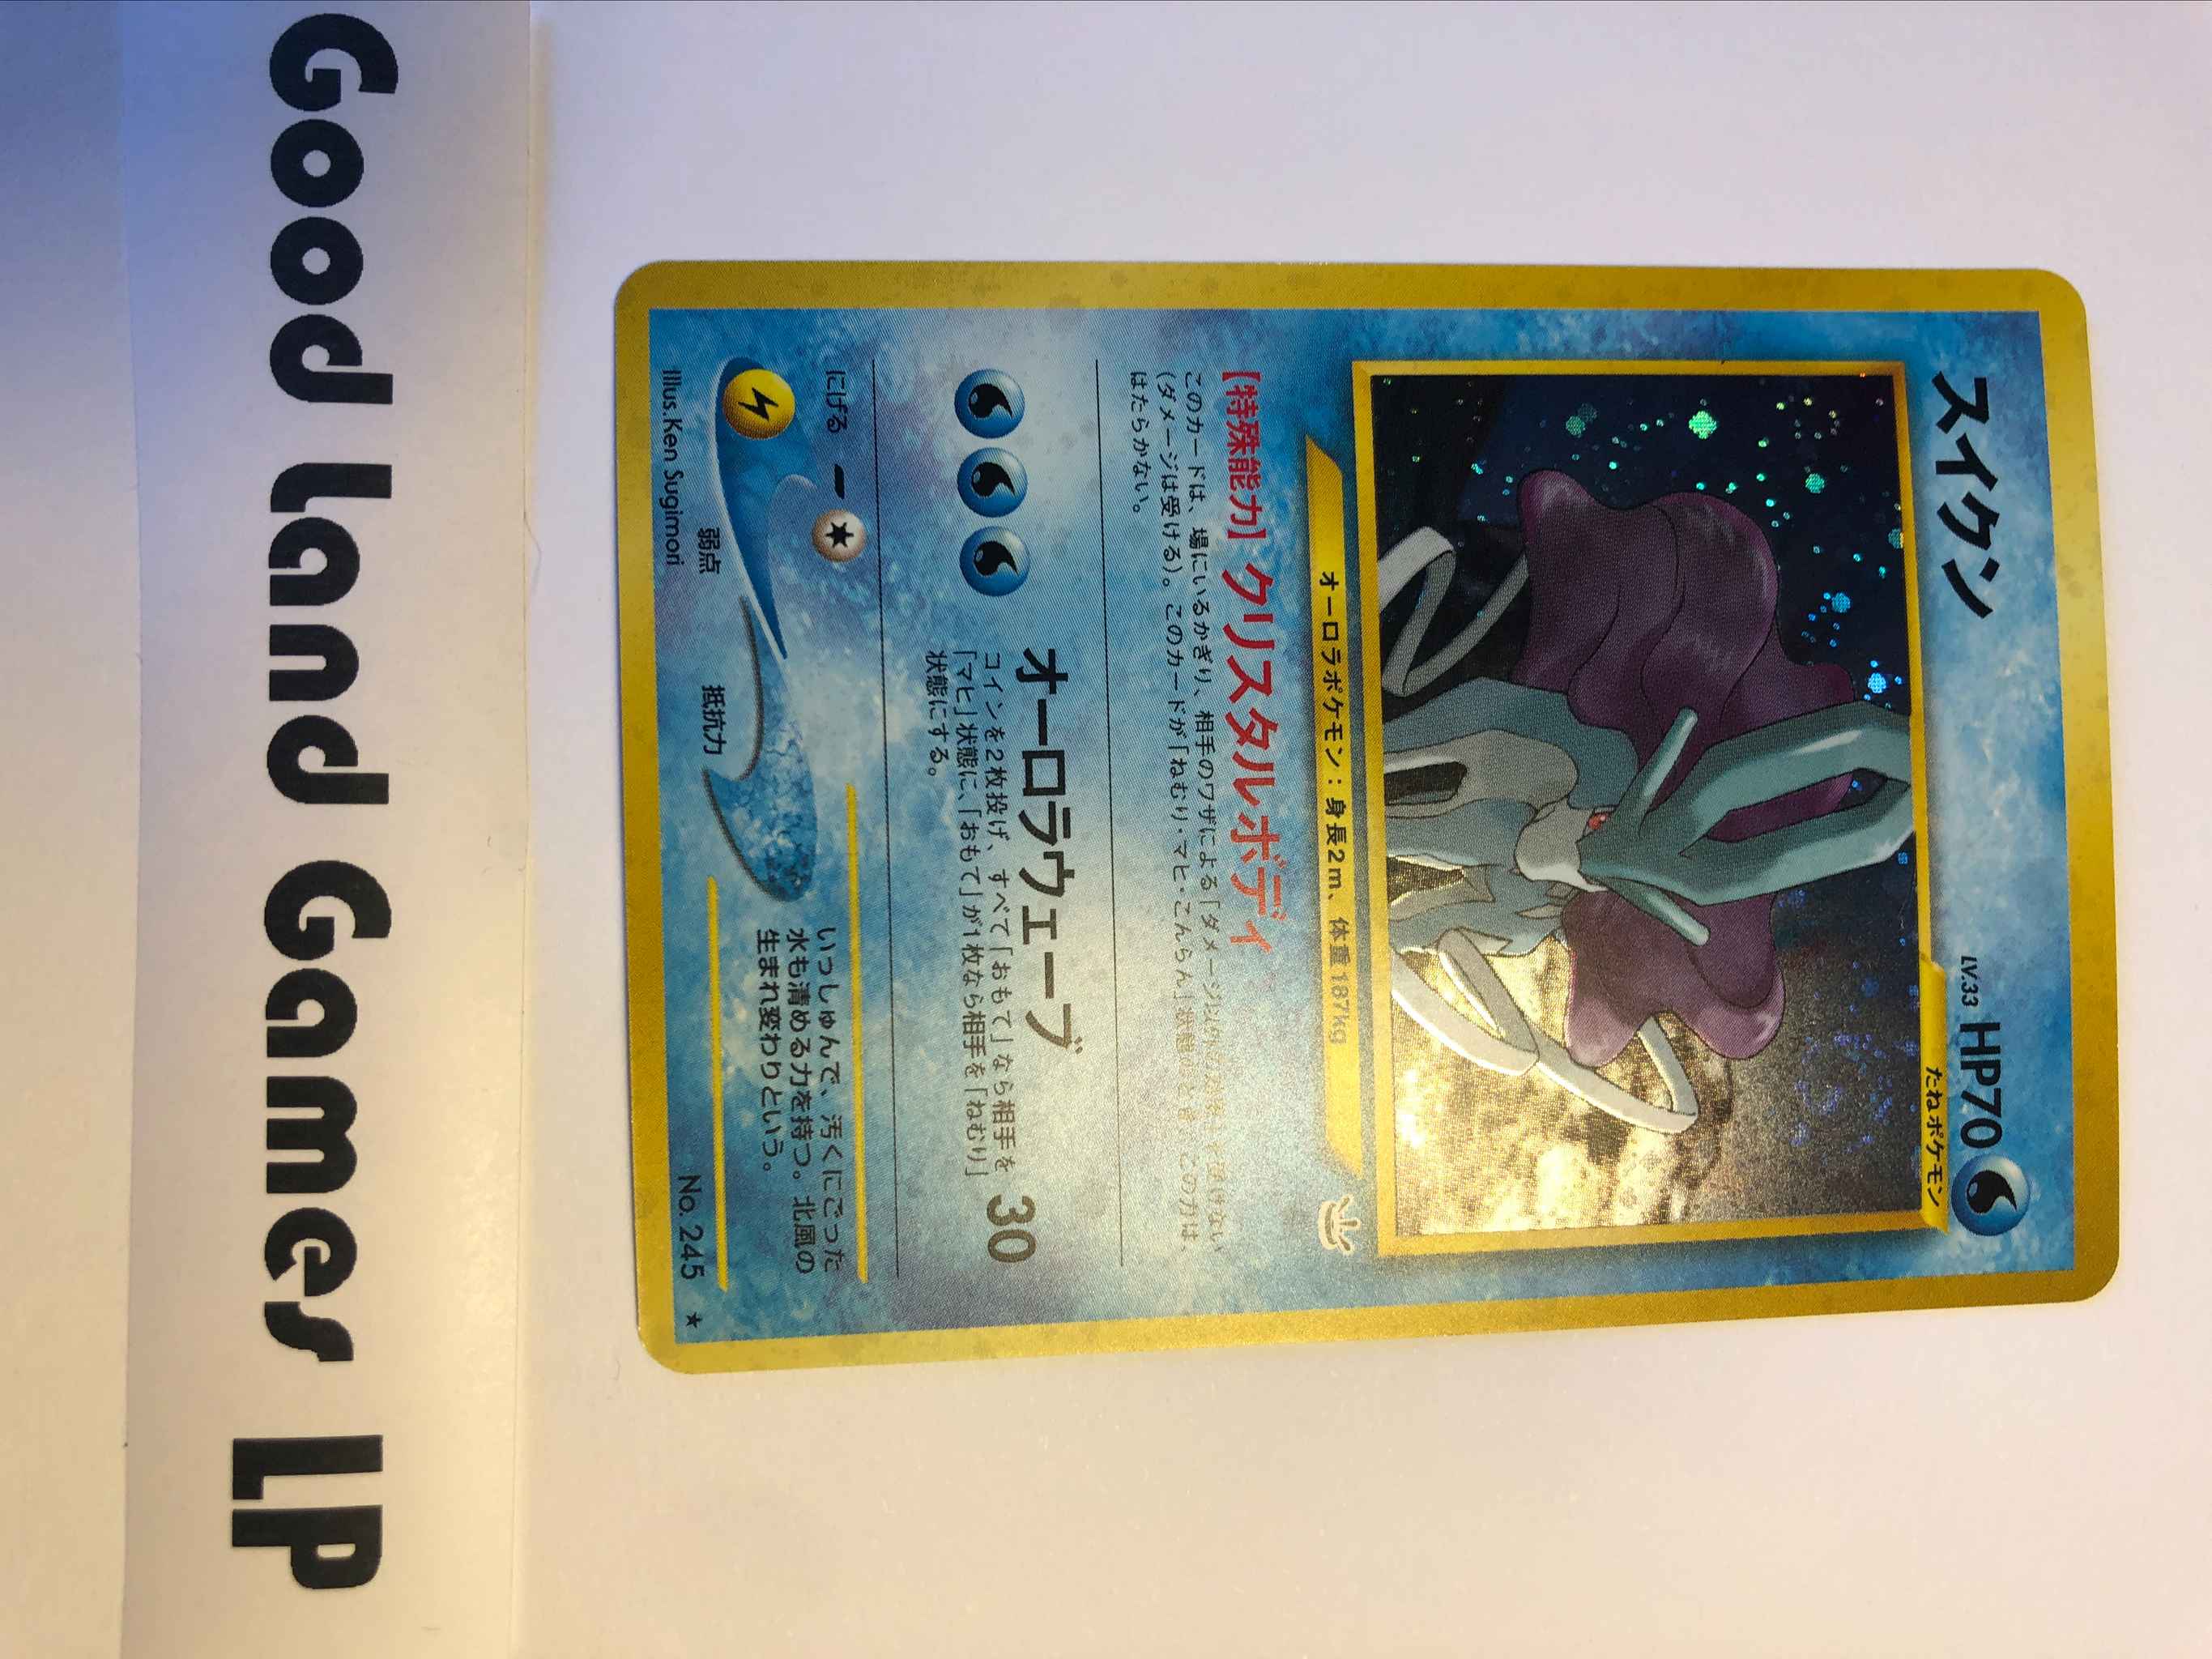 Japanese Lp Holographic Suicune With Photos Suicune 14 Neo Revelation Pokemon Online Gaming Store For Cards Miniatures Singles Packs Booster Boxes